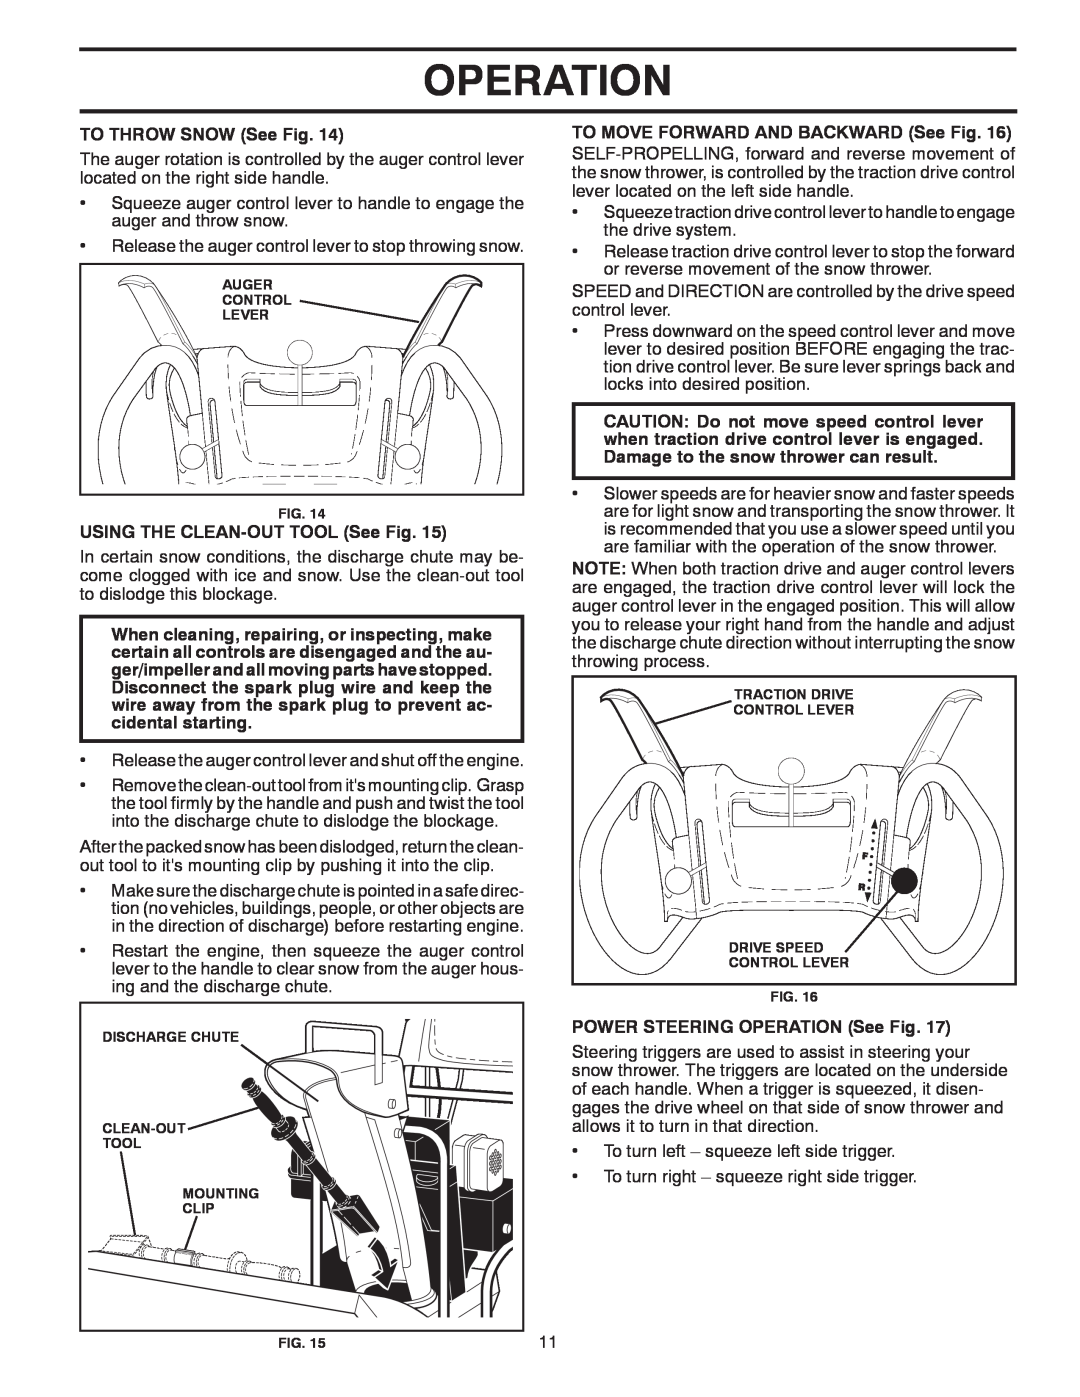 Husqvarna 96193005700 Operation, TO THROW SNOW See Fig, USING THE CLEAN-OUT TOOL See Fig, POWER STEERING OPERATION See Fig 